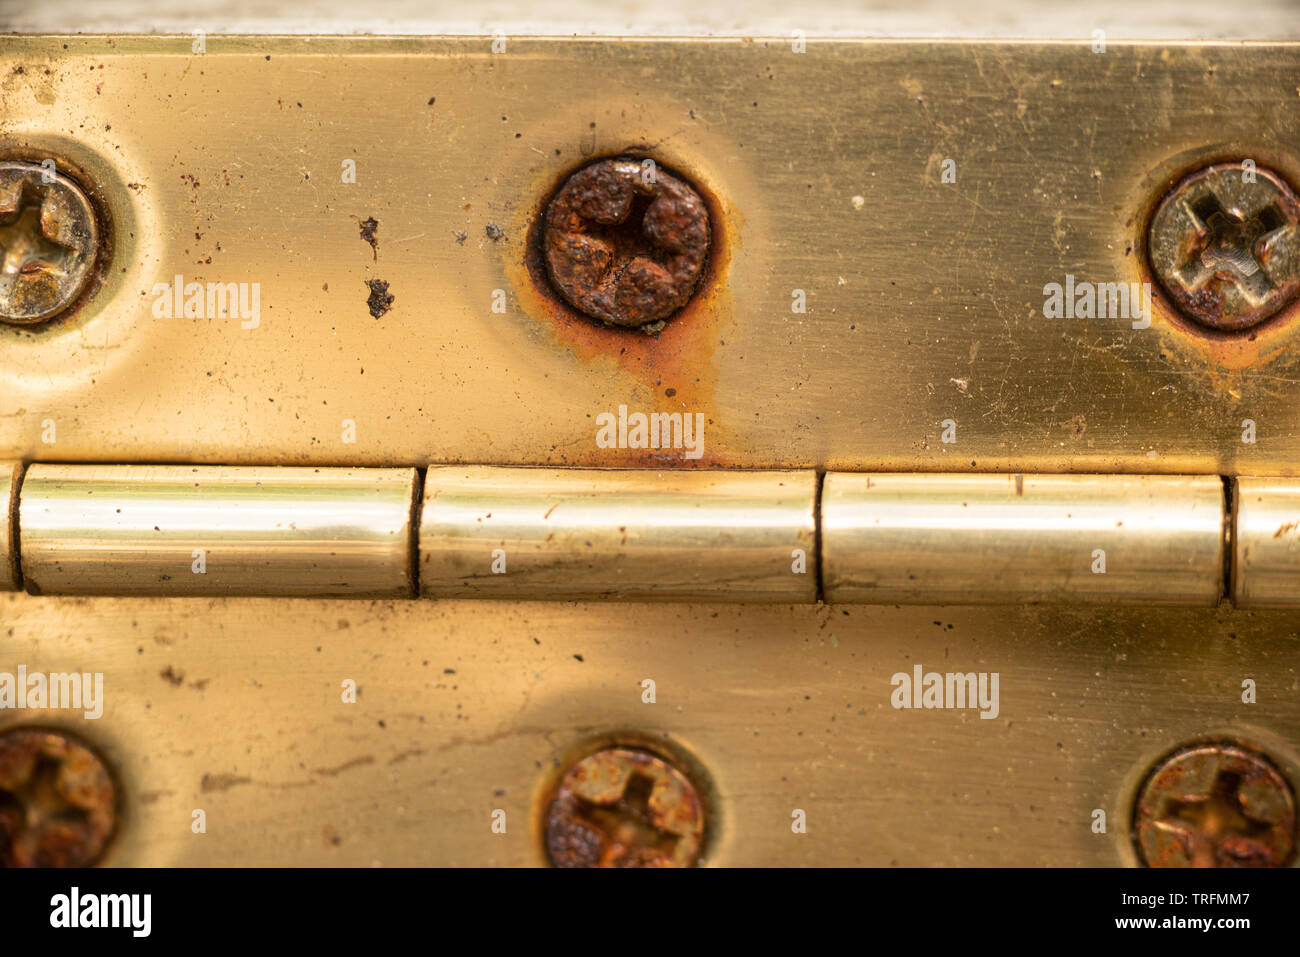 Rusty screws in an old brass hinge. Stock Photo